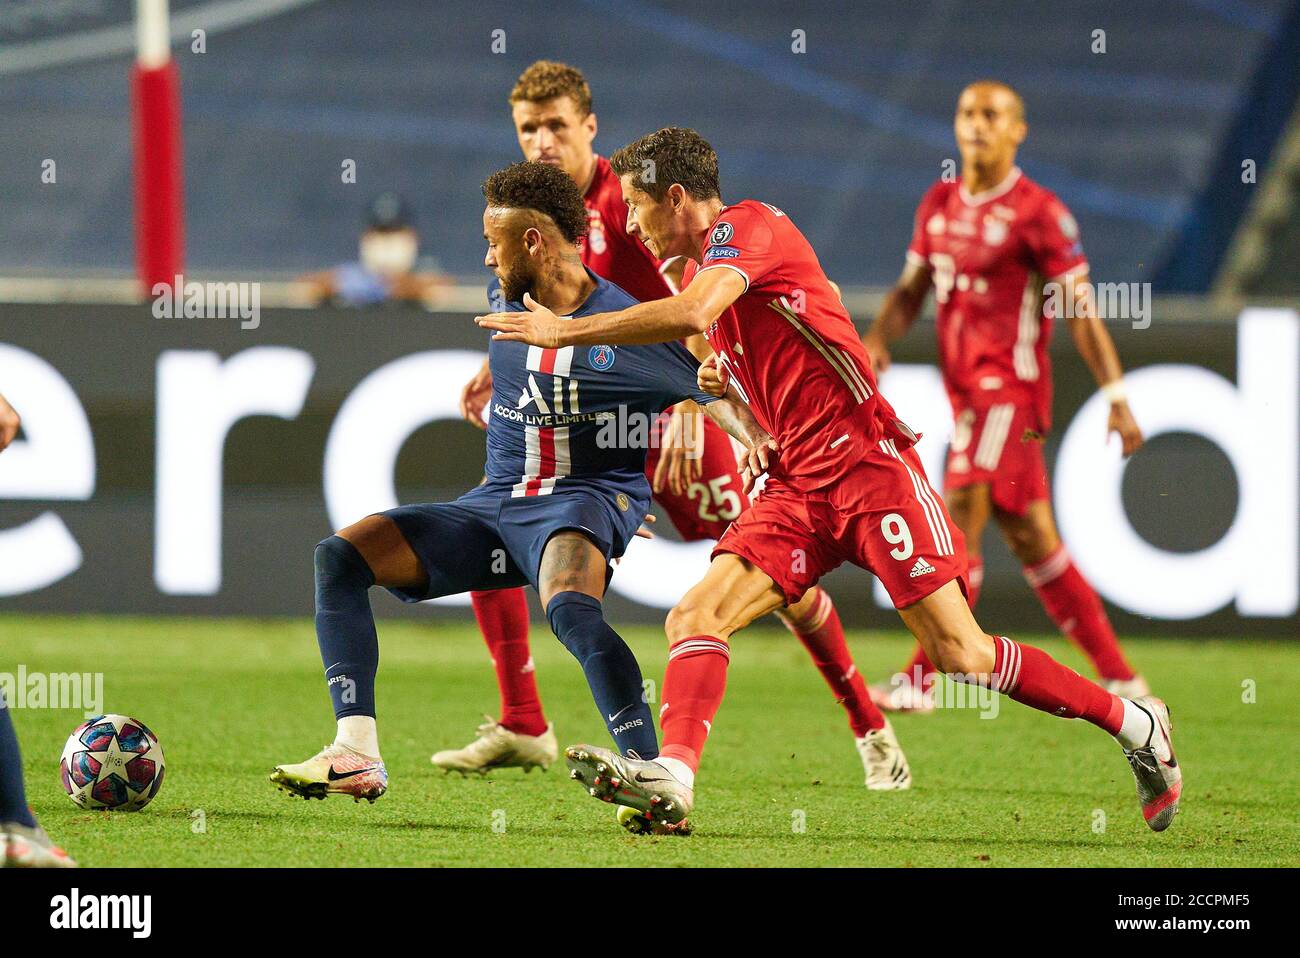 Lisbon, Lissabon, Portugal, 23rd August 2020.  NEYMAR, PSG 10  compete for the ball, tackling, duel, header, zweikampf, action, fight, foul,  Robert LEWANDOWSKI, FCB 9 Thomas MUELLER, MÜLLER, FCB 25  in the final match UEFA Champions League, final tournament FC BAYERN MUENCHEN - PARIS ST. GERMAIN (PSG) 1-0 in season 2019/2020, FCB,  © Peter Schatz / Alamy Live News / Pool   - UEFA REGULATIONS PROHIBIT ANY USE OF PHOTOGRAPHS as IMAGE SEQUENCES and/or QUASI-VIDEO -  National and international News-Agencies OUT Editorial Use ONLY Stock Photo